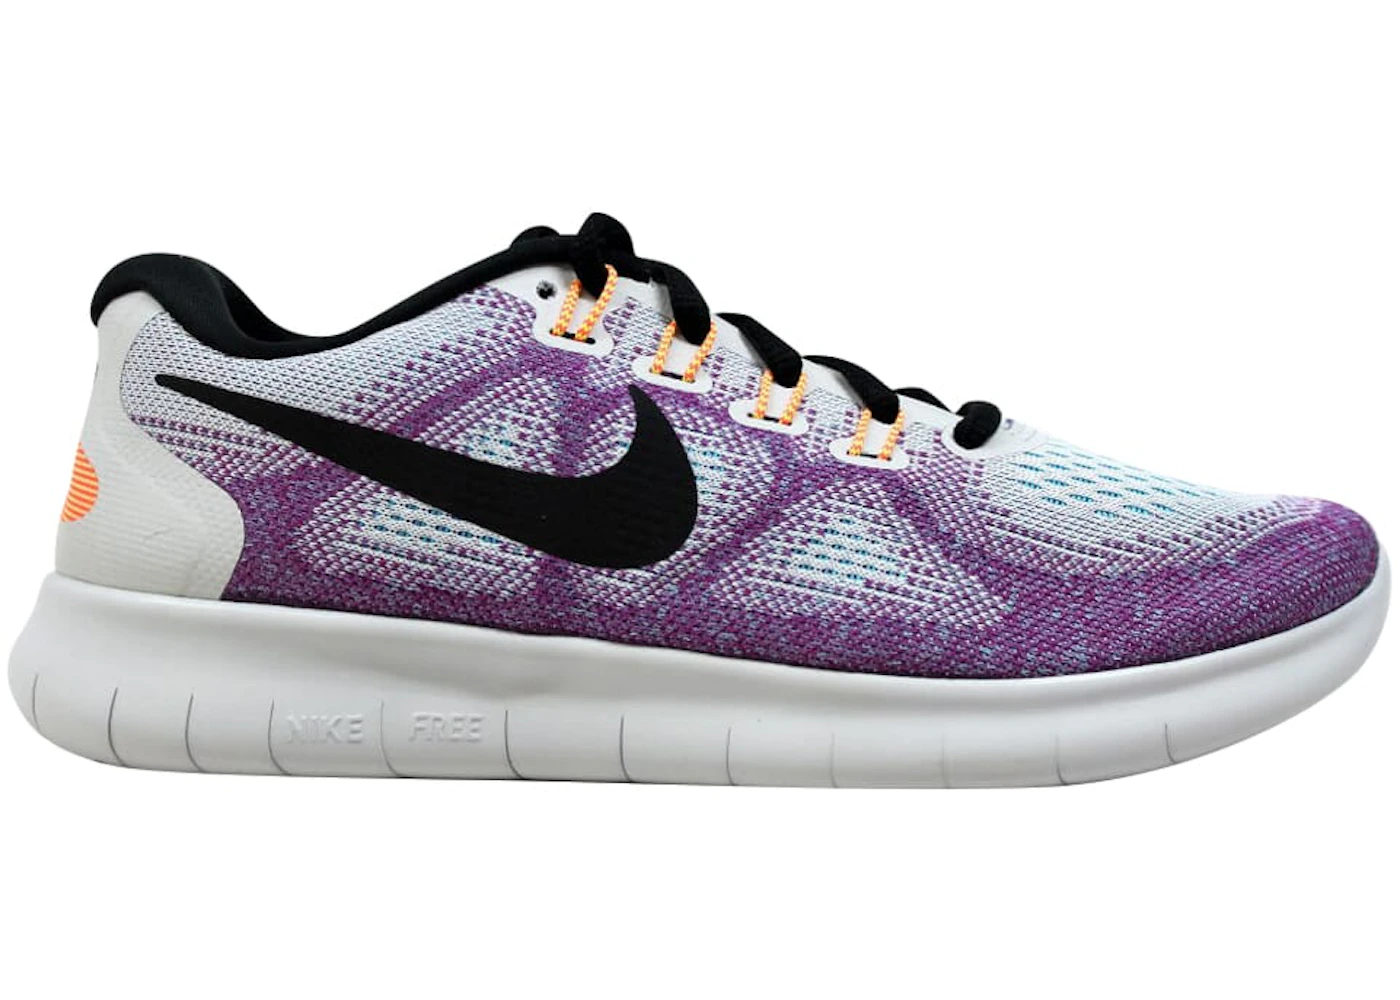 paquete pimienta heroína Nike Free RN 2017 Off White (Women's) - 880840-102 - US